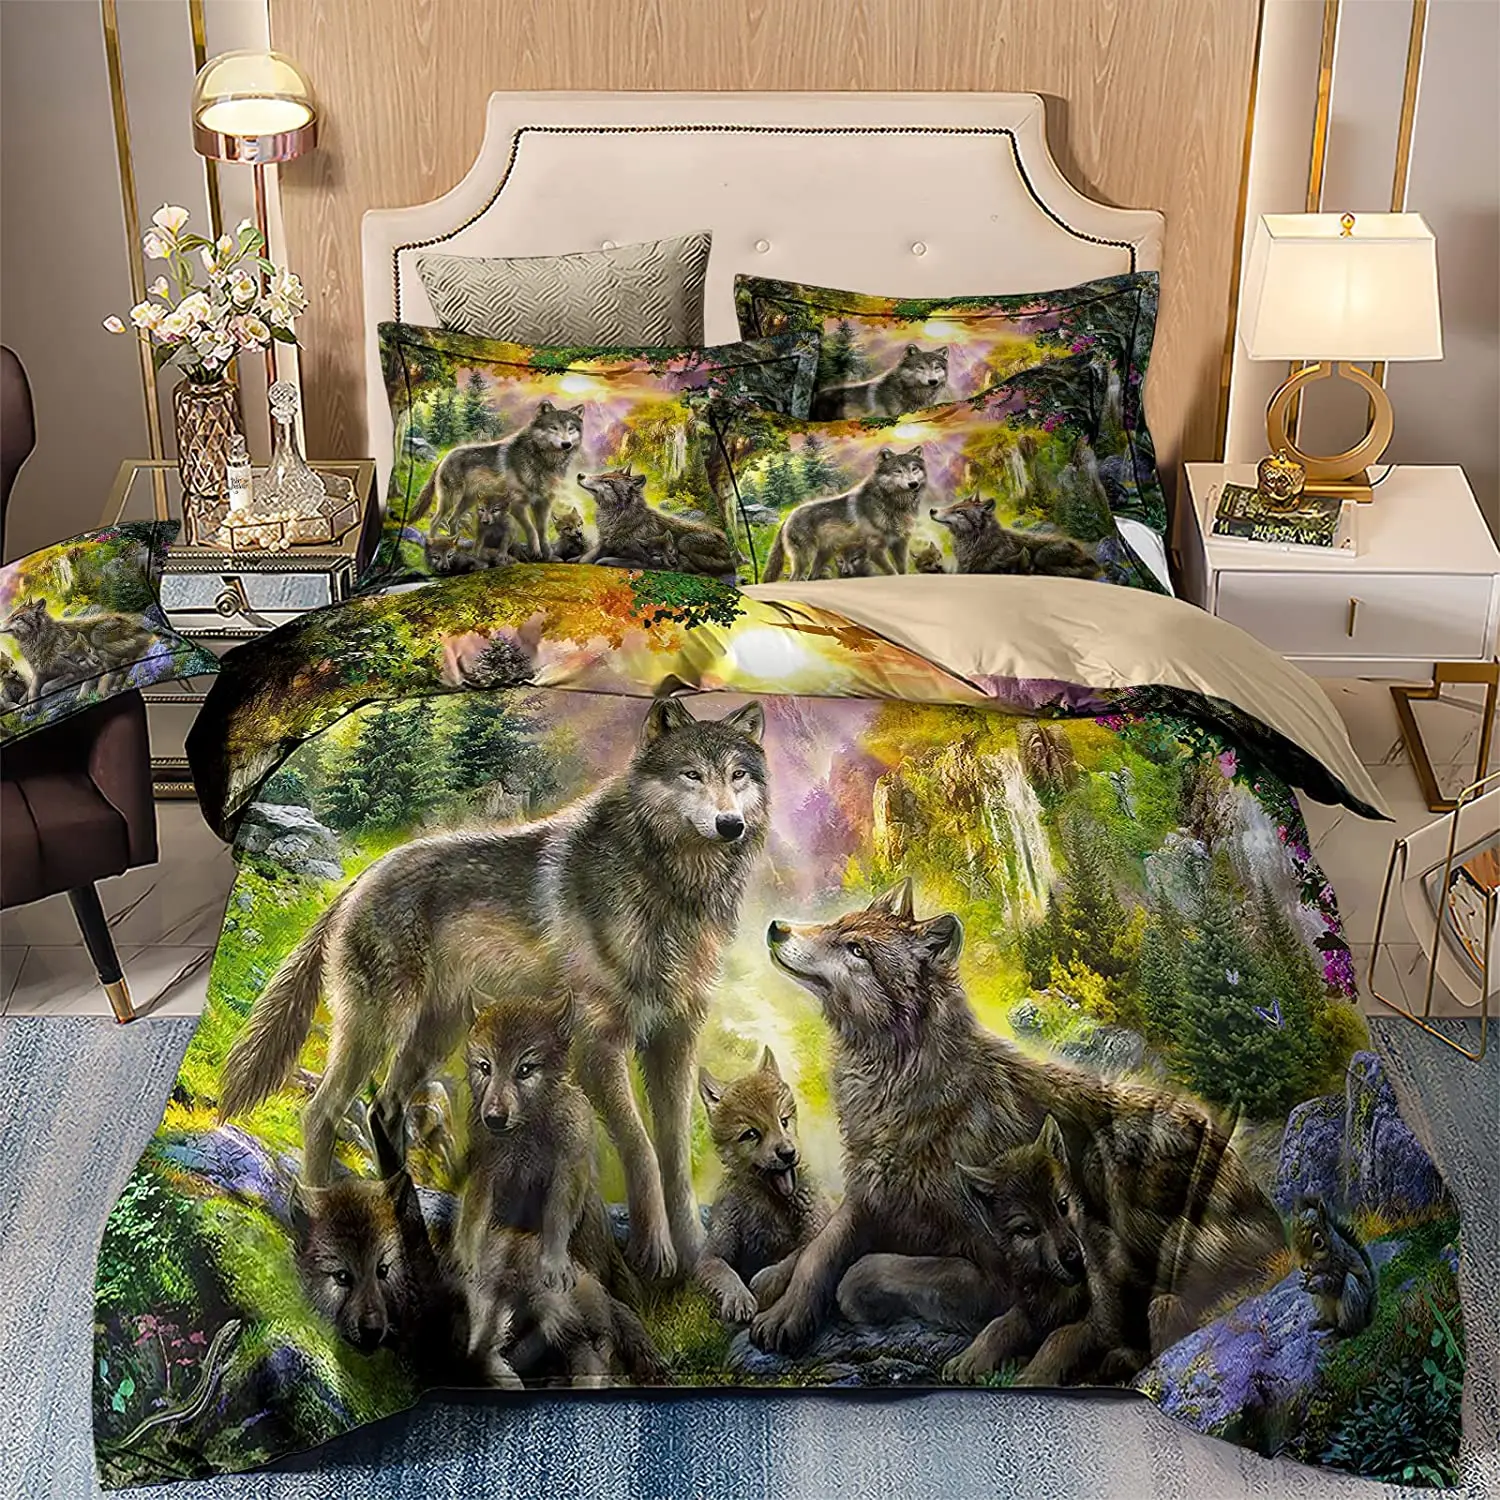 

3D Wolf Bedding Animal Print Duvet Cover Set Soft Microfiber Duvet Cover with Pillowcases with Zipper Closure for Kids Teens Adu